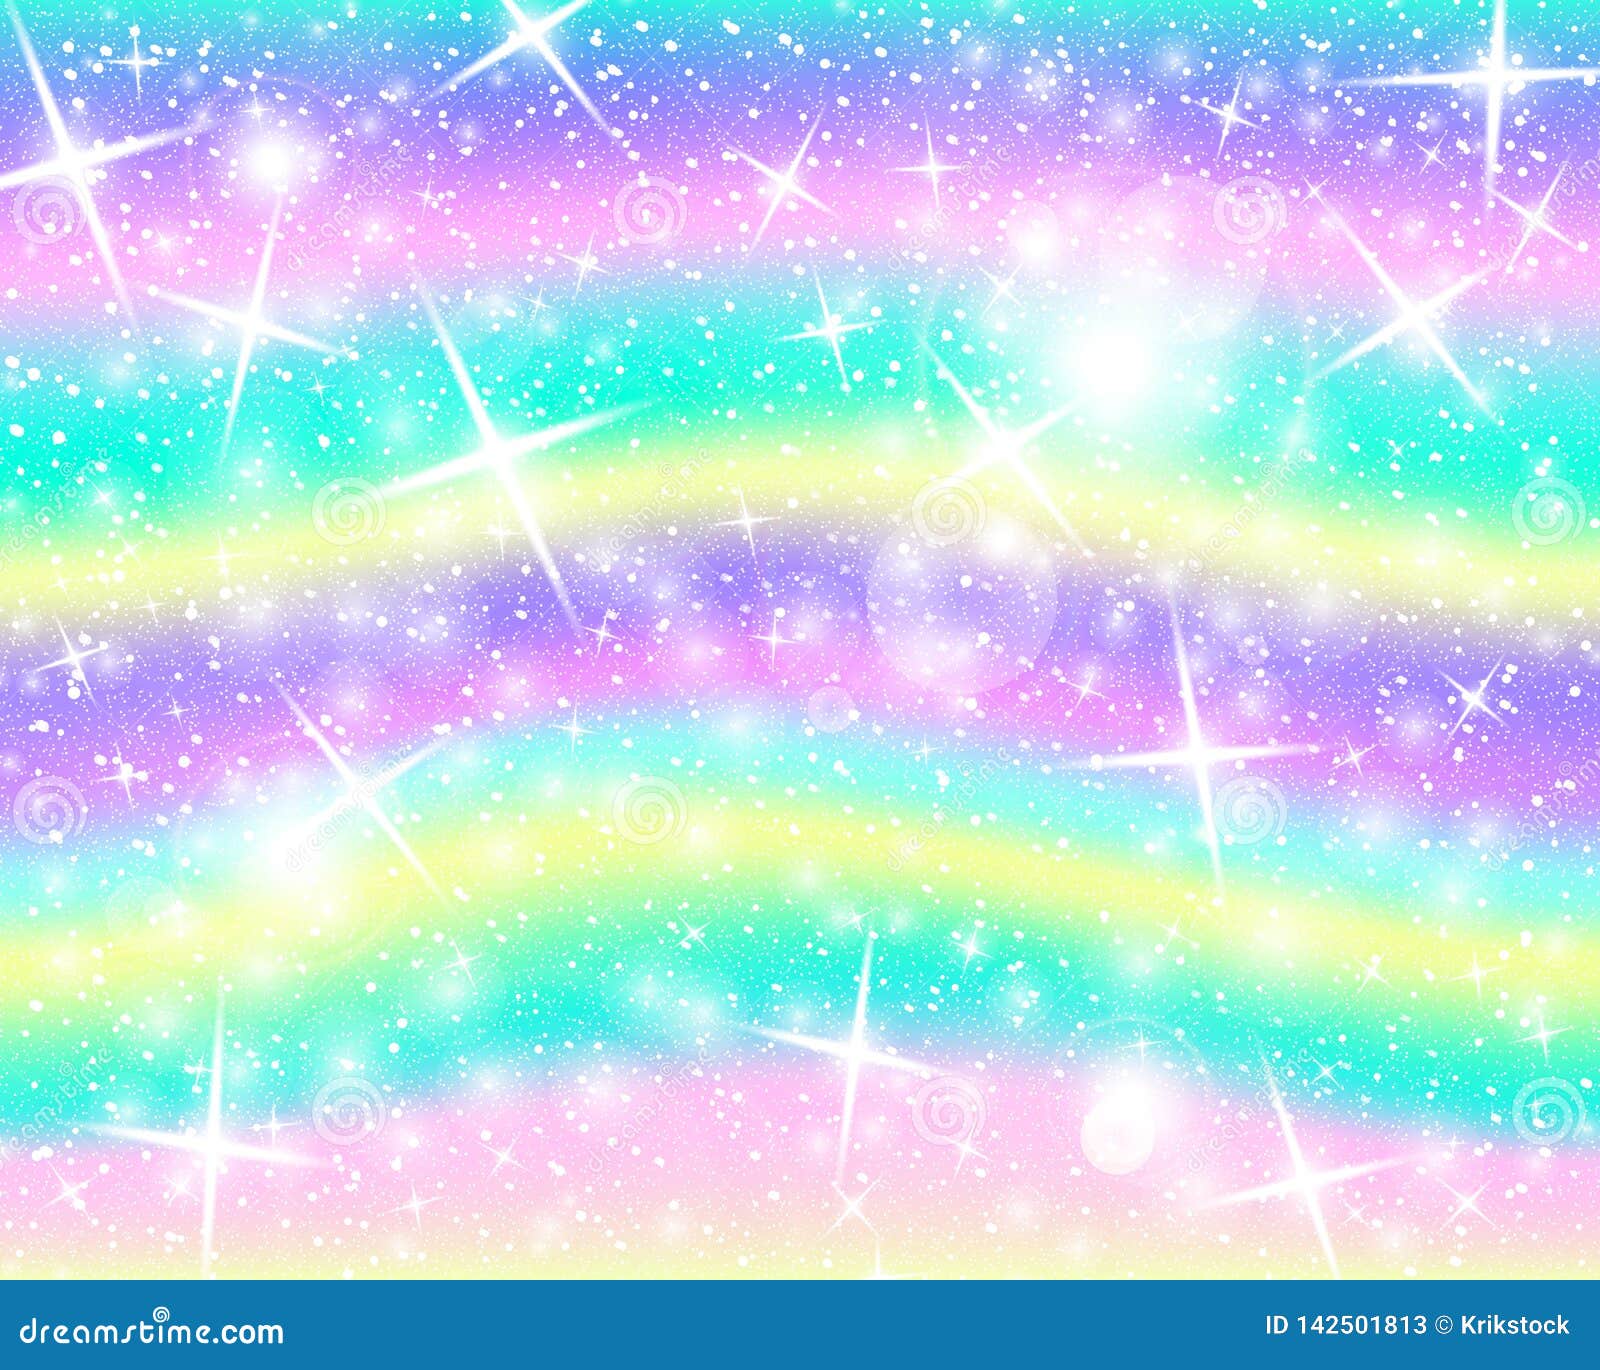 Colorful Fantasy Unicorn Rainbow Clouds Background Wallpaper Image For Free  Download  Pngtree